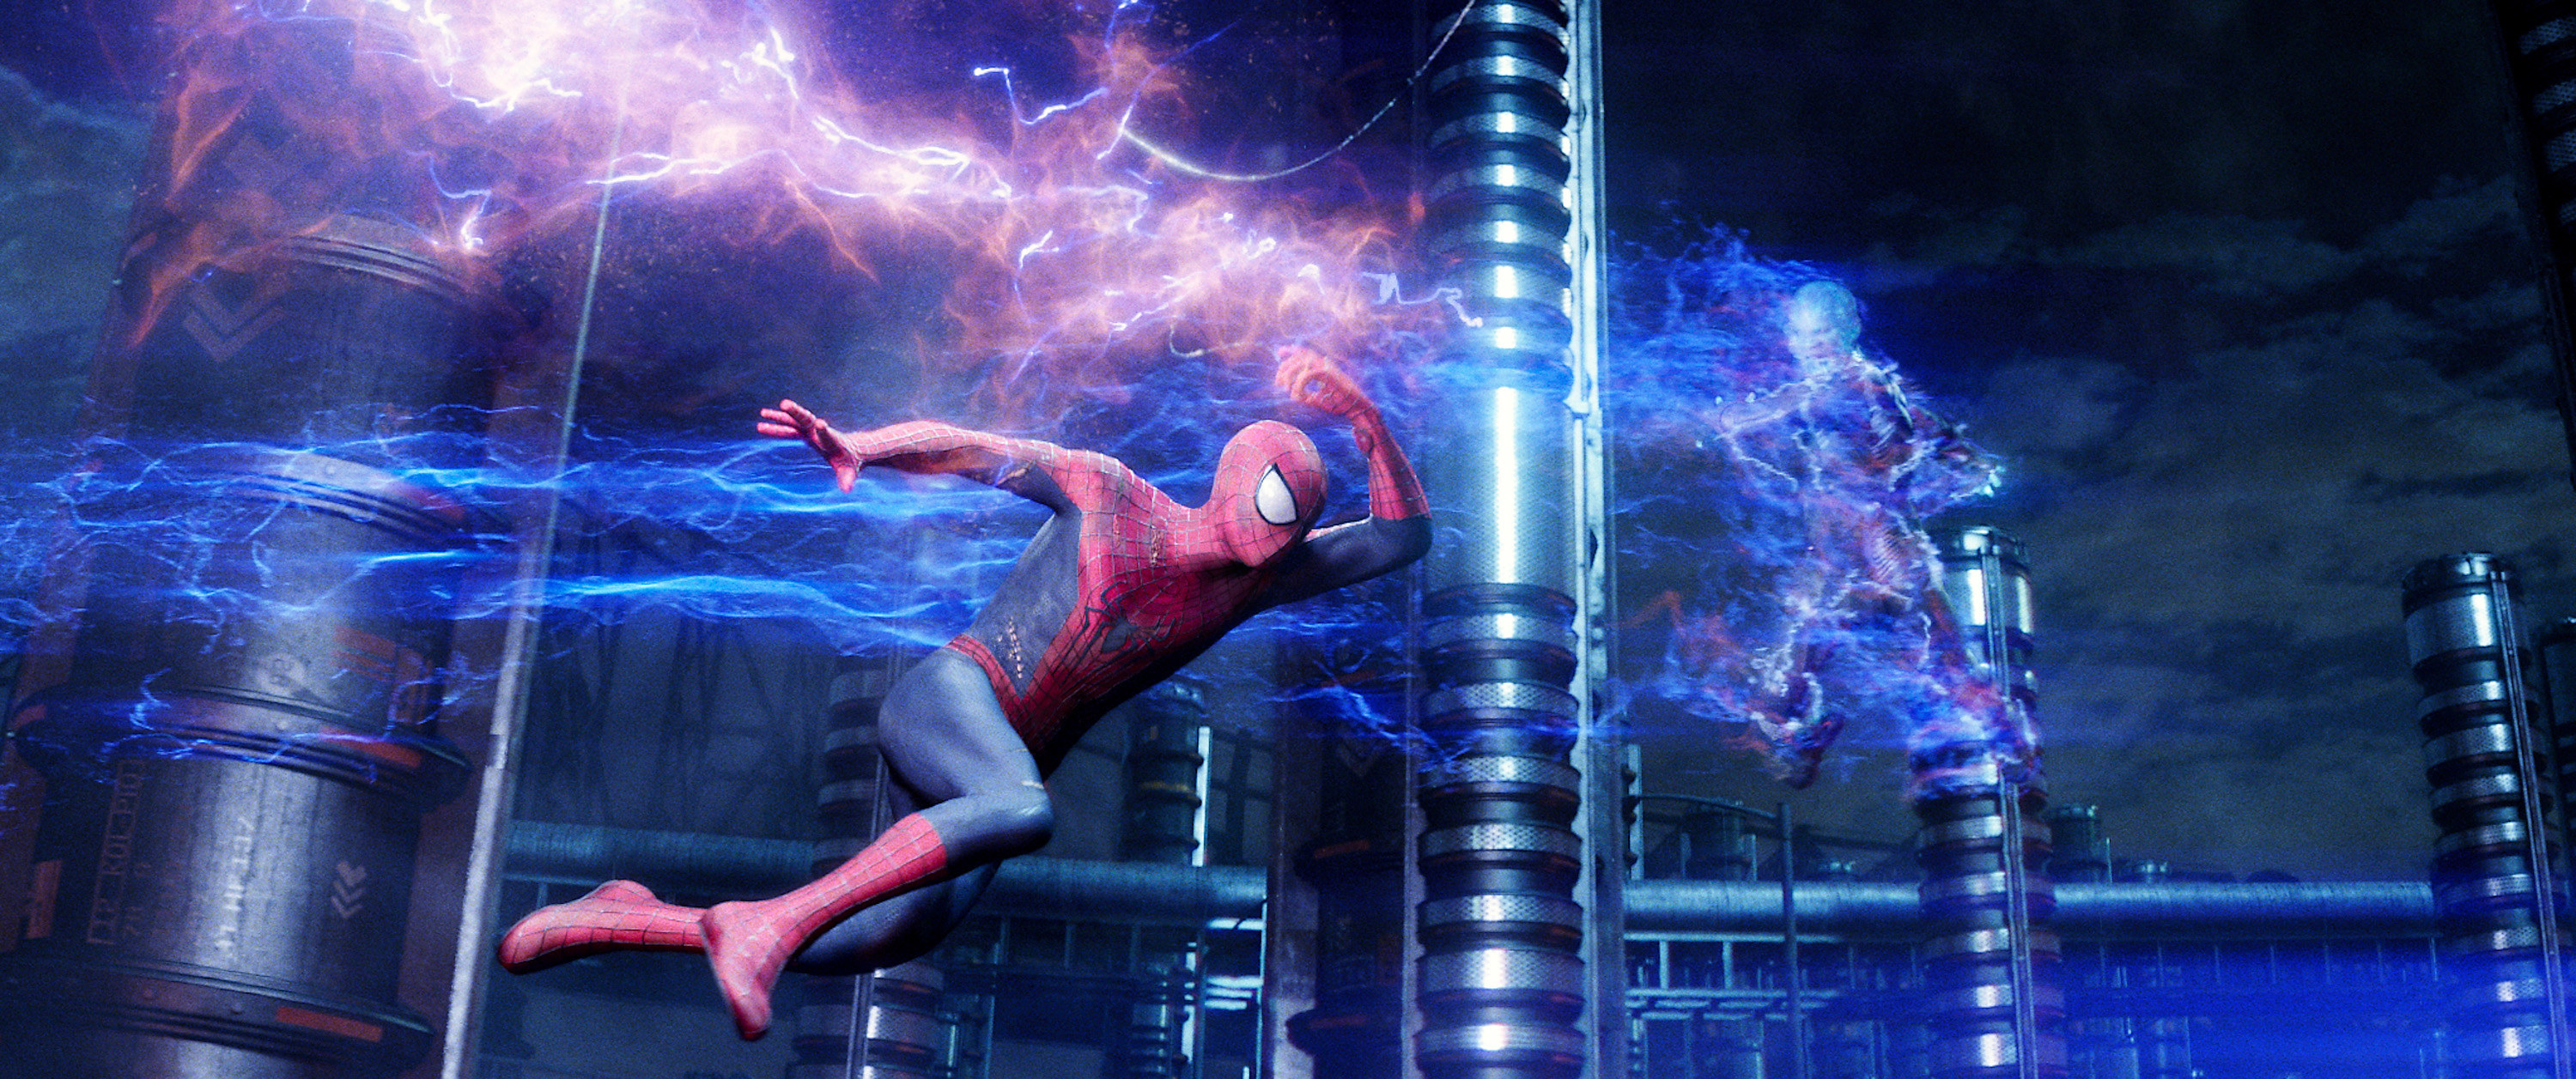 Spider-Man outrunning Electro